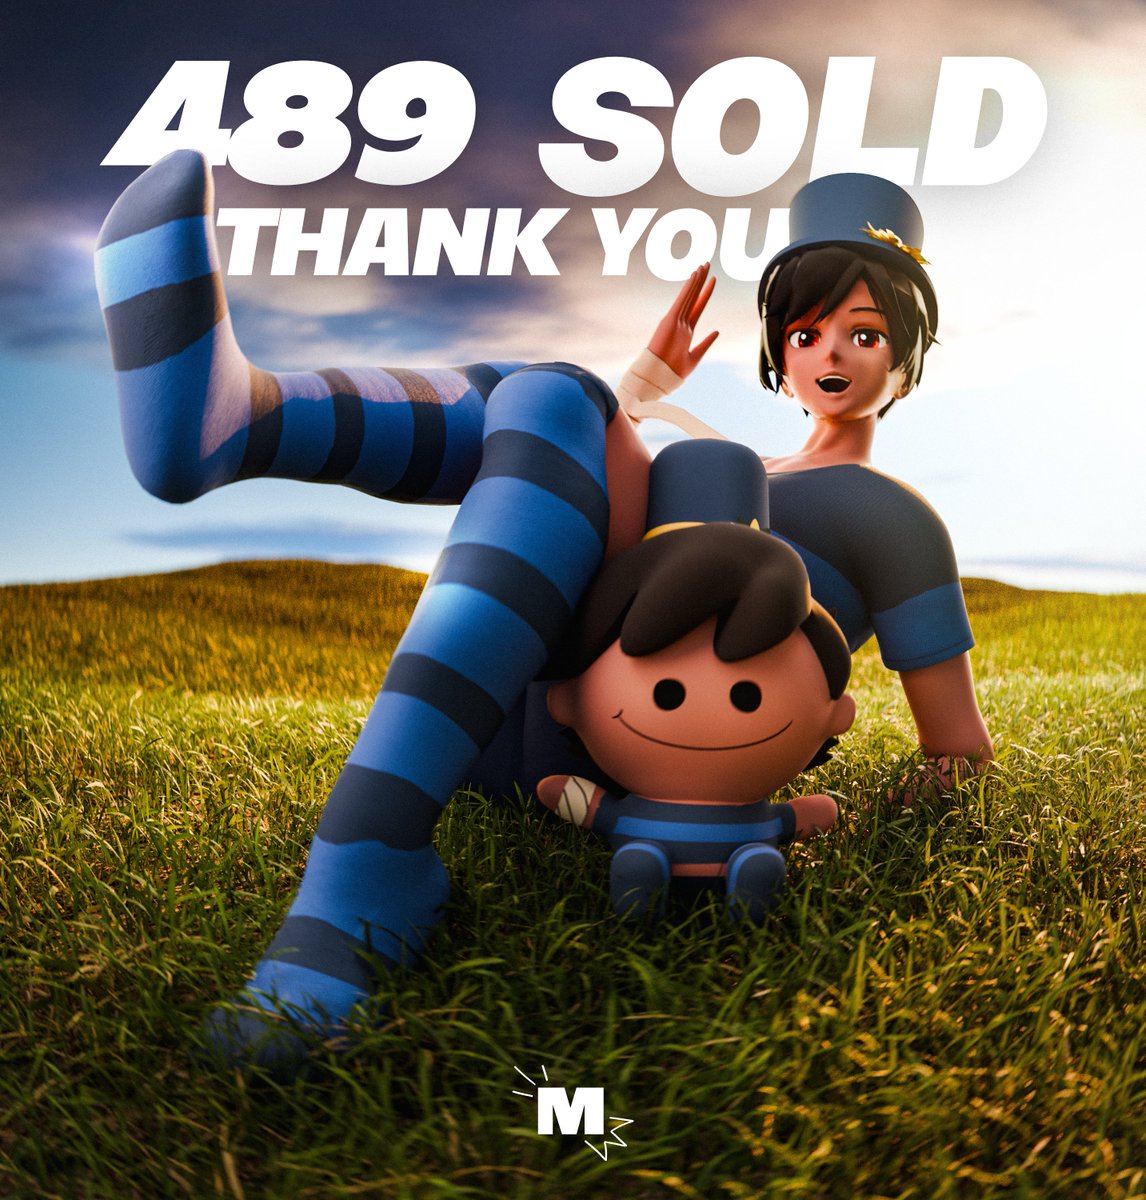 after a month long campaign, we ended up with 489 PLUSHIES SOLD! thank you all so so much for the support. i wasn't expecting to sell that much considering my lack of uploads/consistency, and to see people show up to get the plushie really warms my heart. if you weren't able to